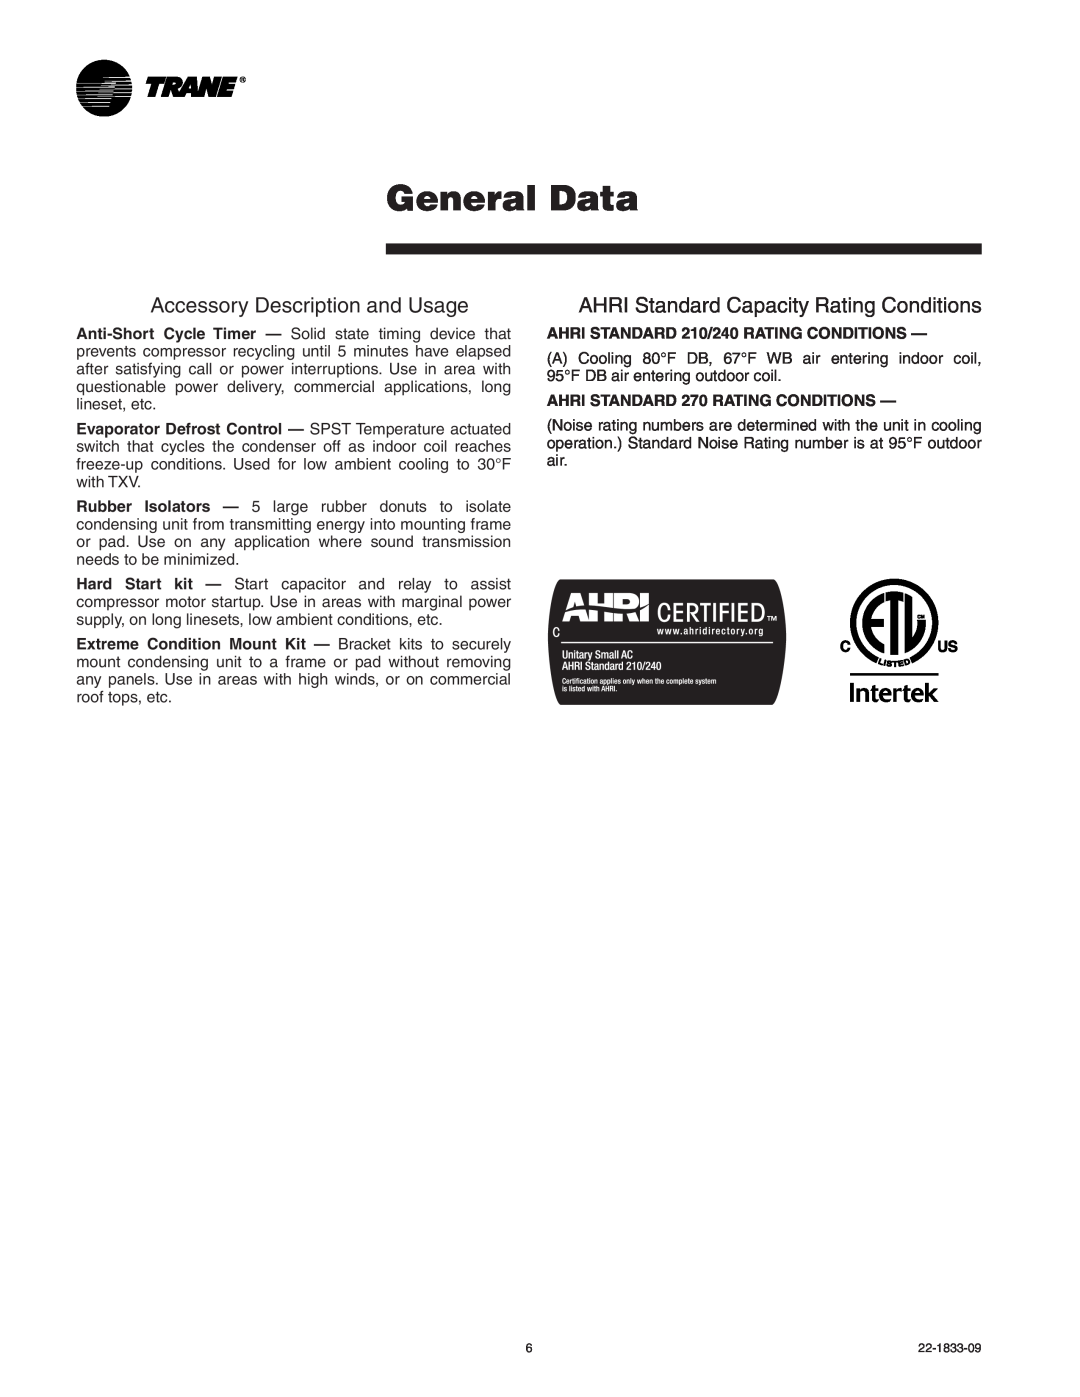 Trane 4TTB4 manual General Data, Accessory Description and Usage, AHRI Standard Capacity Rating Conditions 